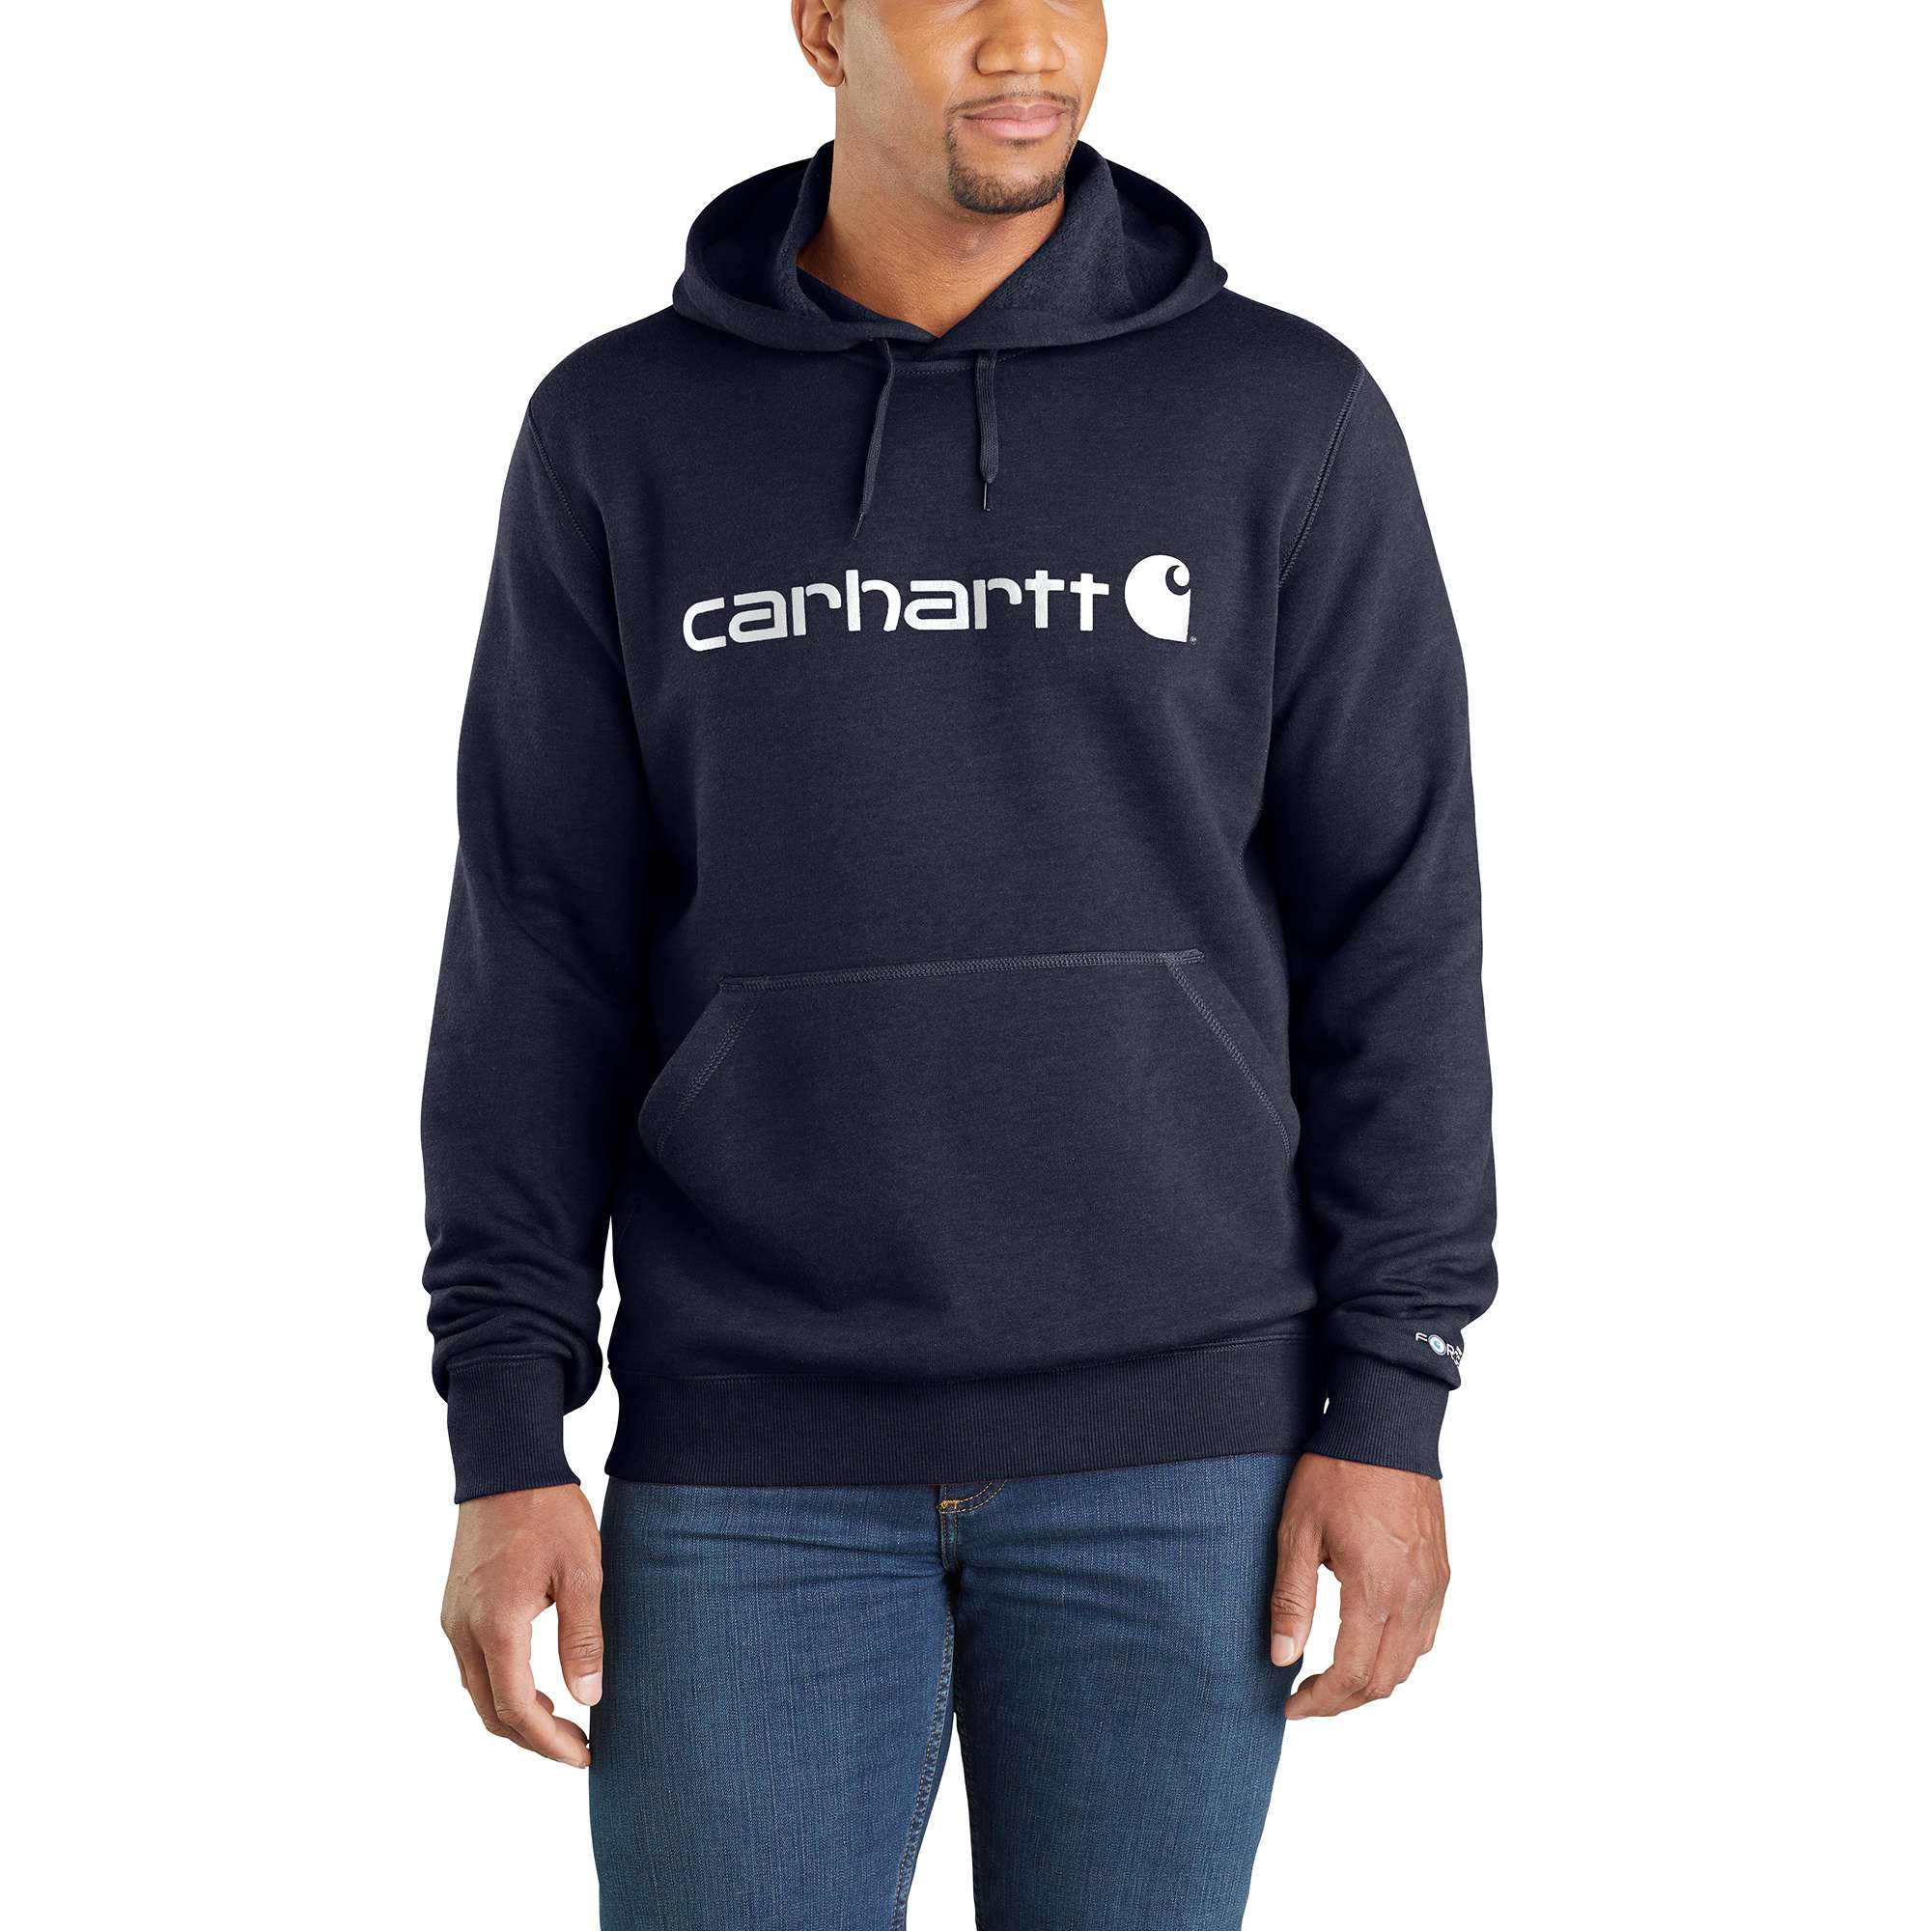 Big & Tall Clothing - Outdoor & Work Big & Tall Clothes for Men | Carhartt